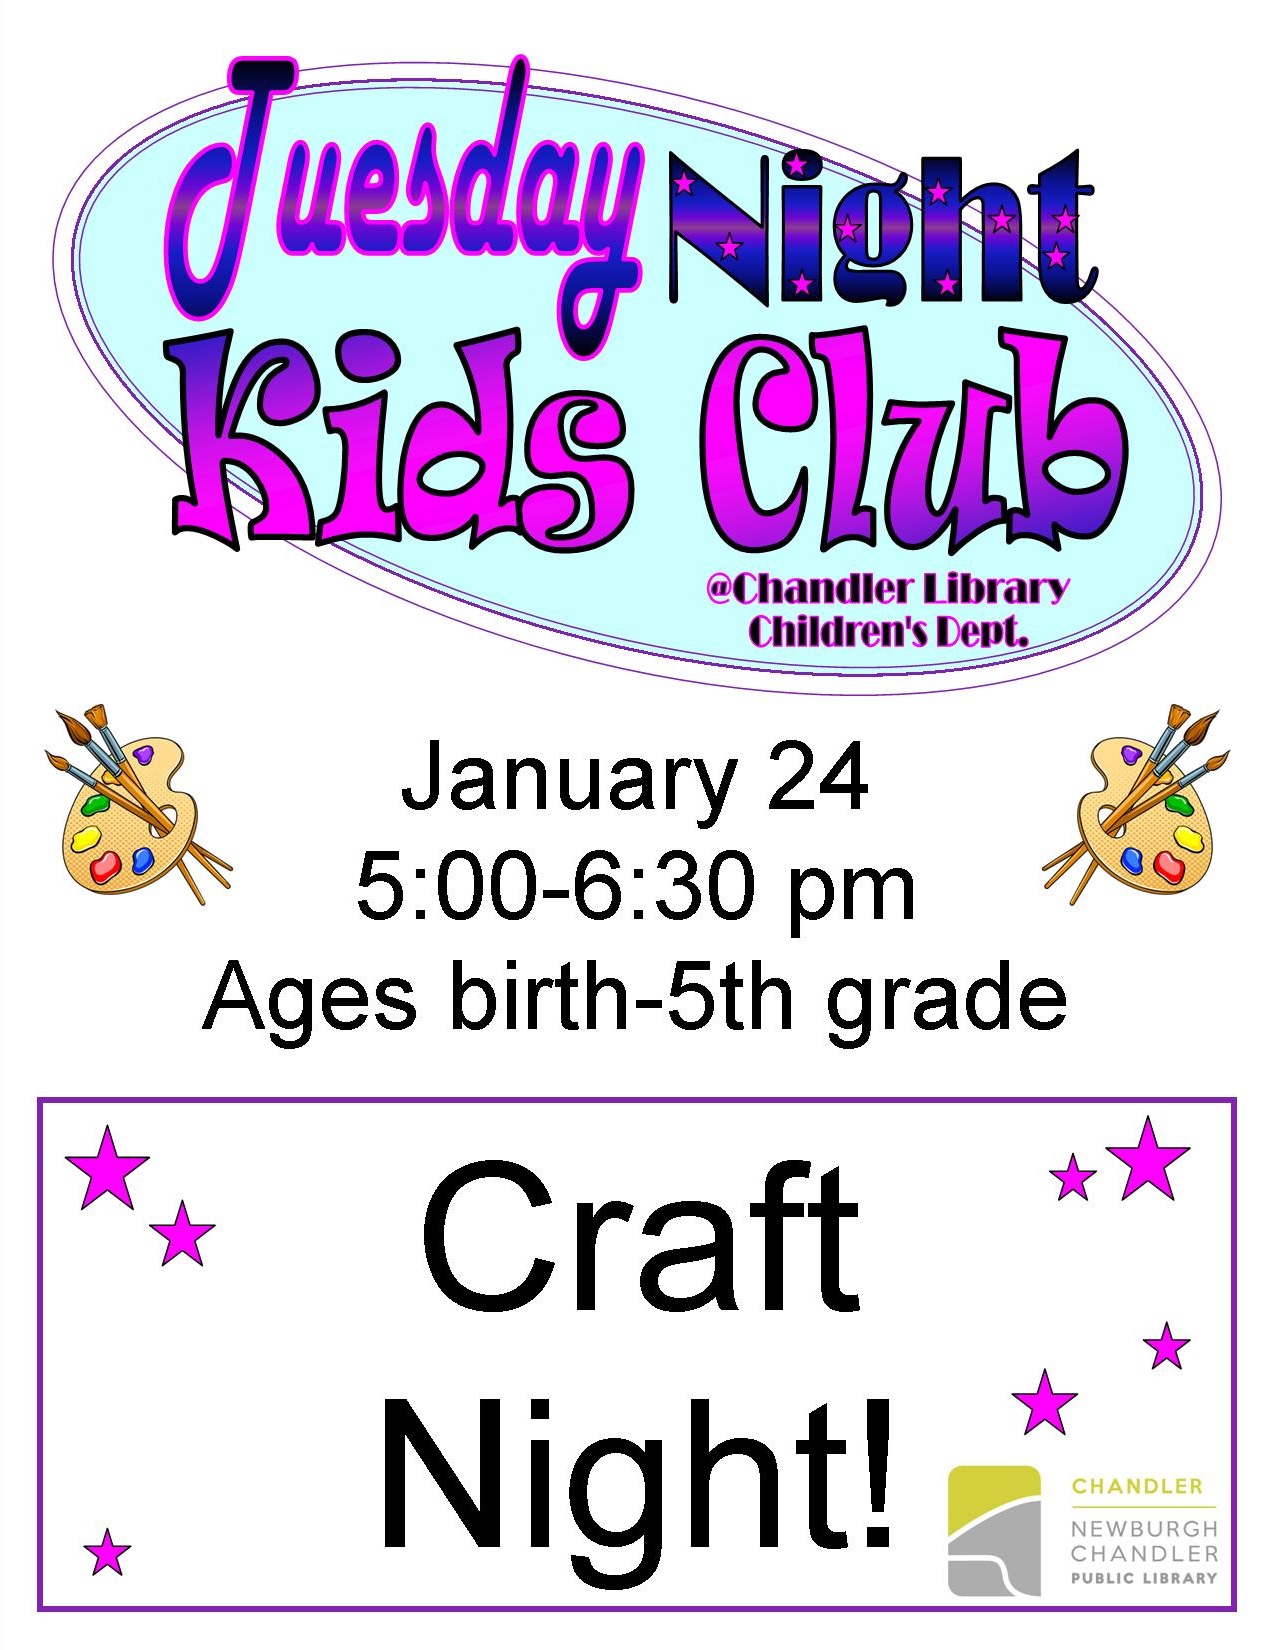 Tuesday Night Kids Club: Craft Night @ Chandler Library Children's Department | Chandler | Indiana | United States